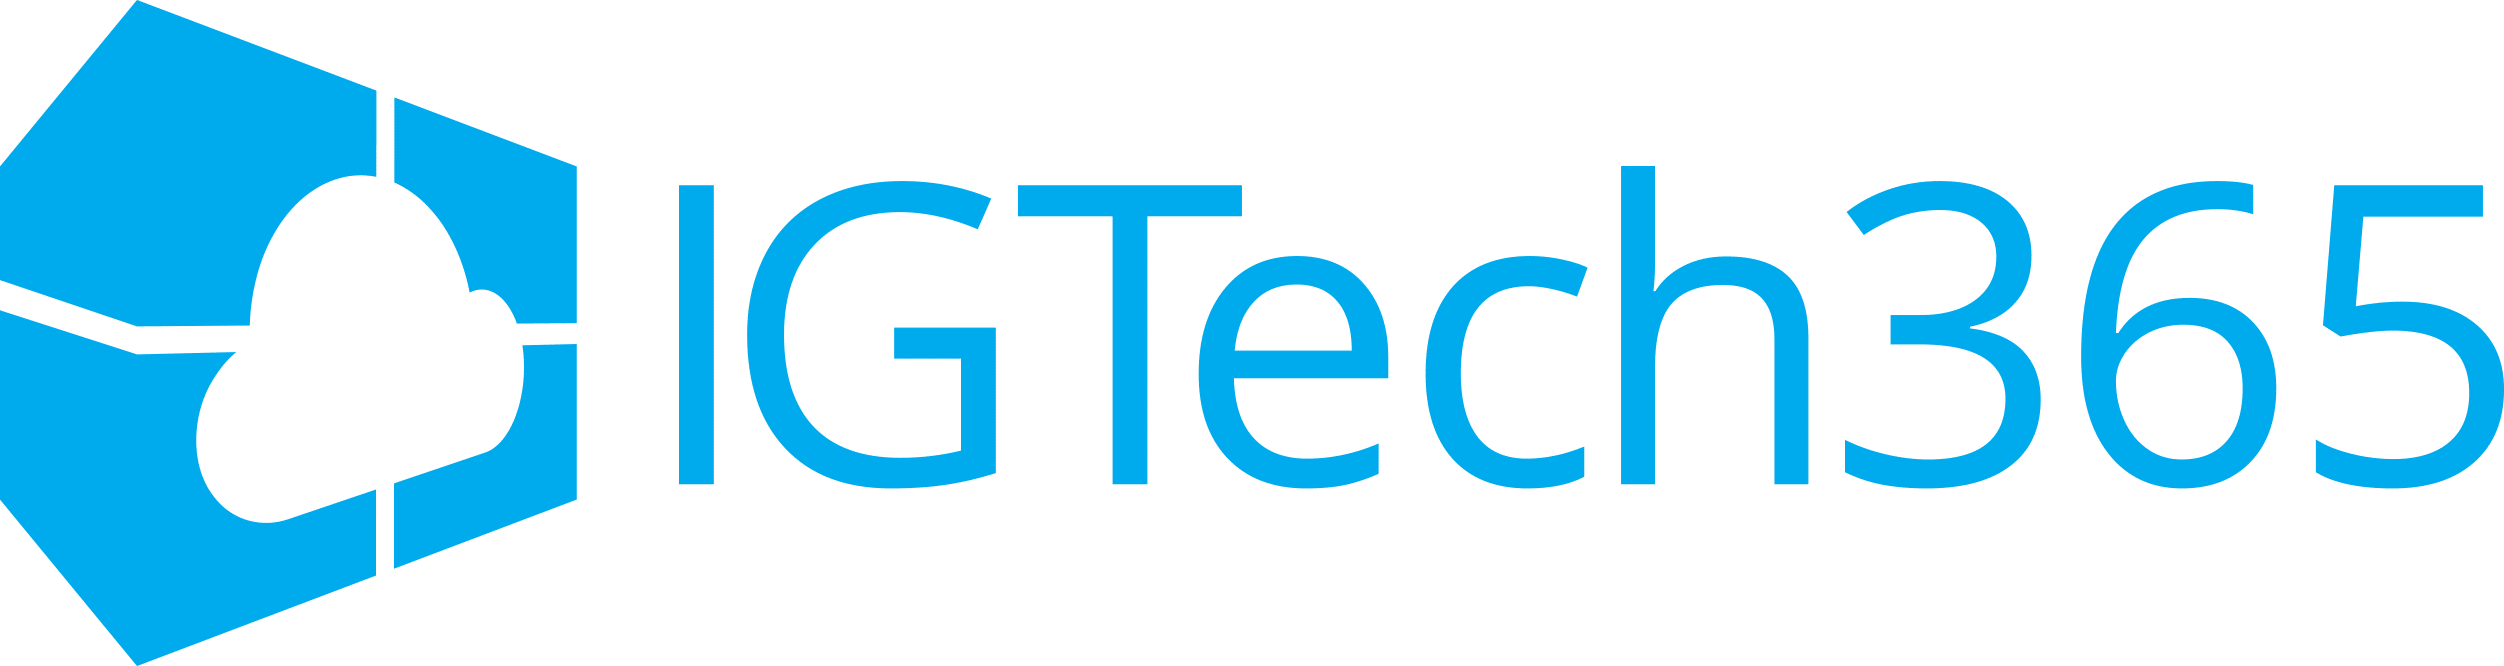 IGTech365 Logo - Managed IT Services Tampa